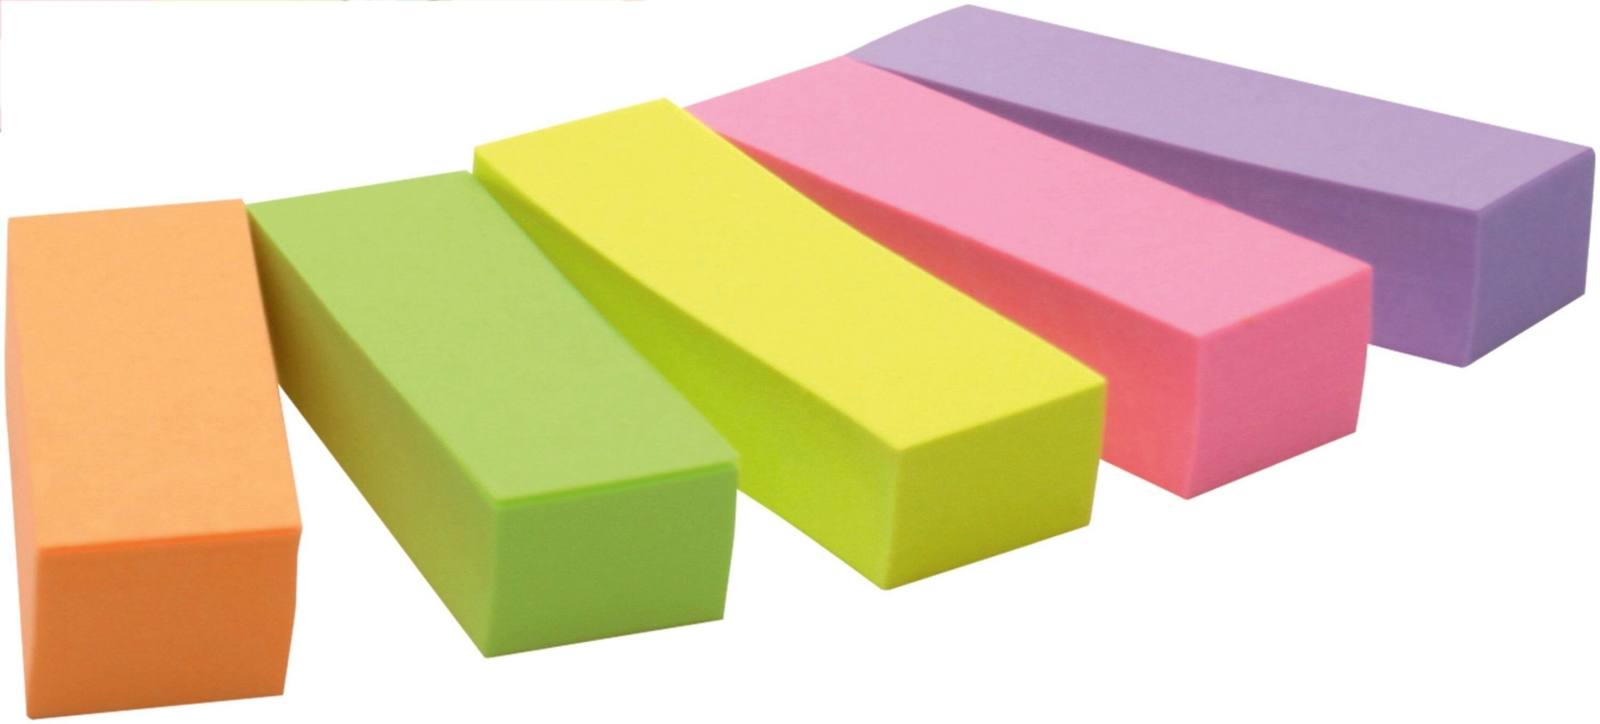 3M Post-it Page marker 670-5, 15 mm x 50 mm, neon yellow, neon green, neon orange, neon pink, violet, 5 x 100 sheets